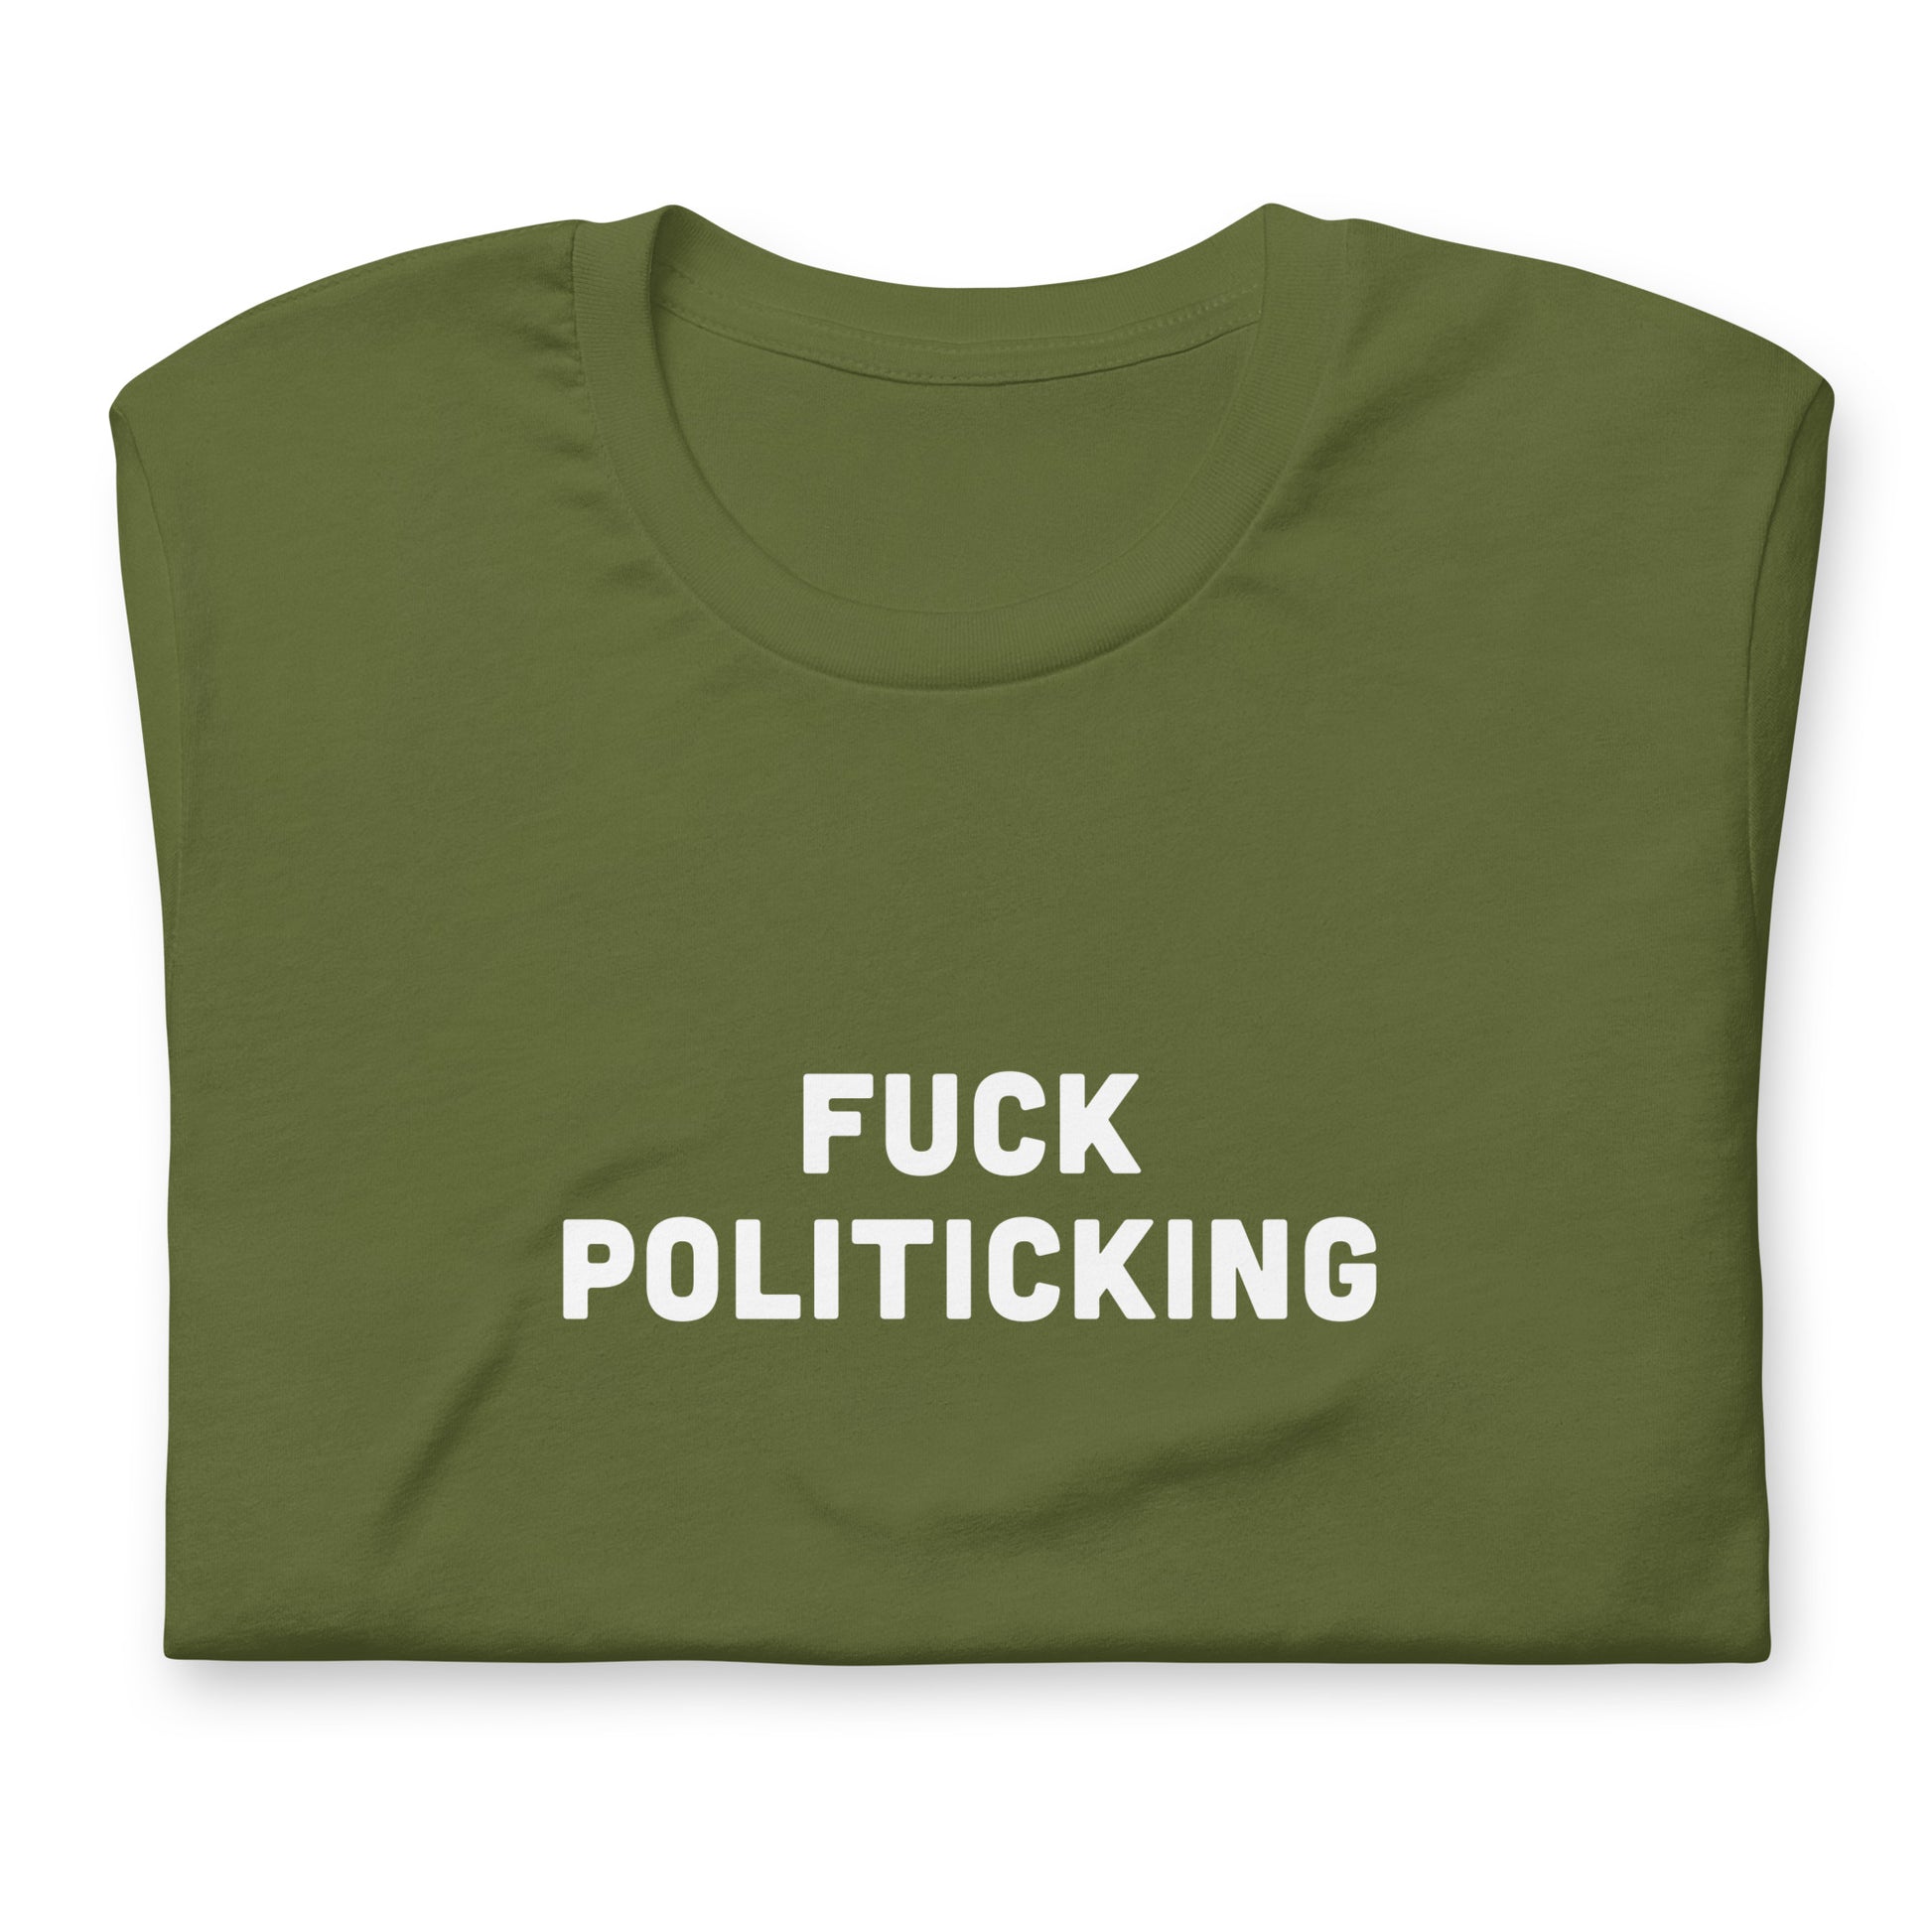 Fuck Politicking T-Shirt Size S Color Navy